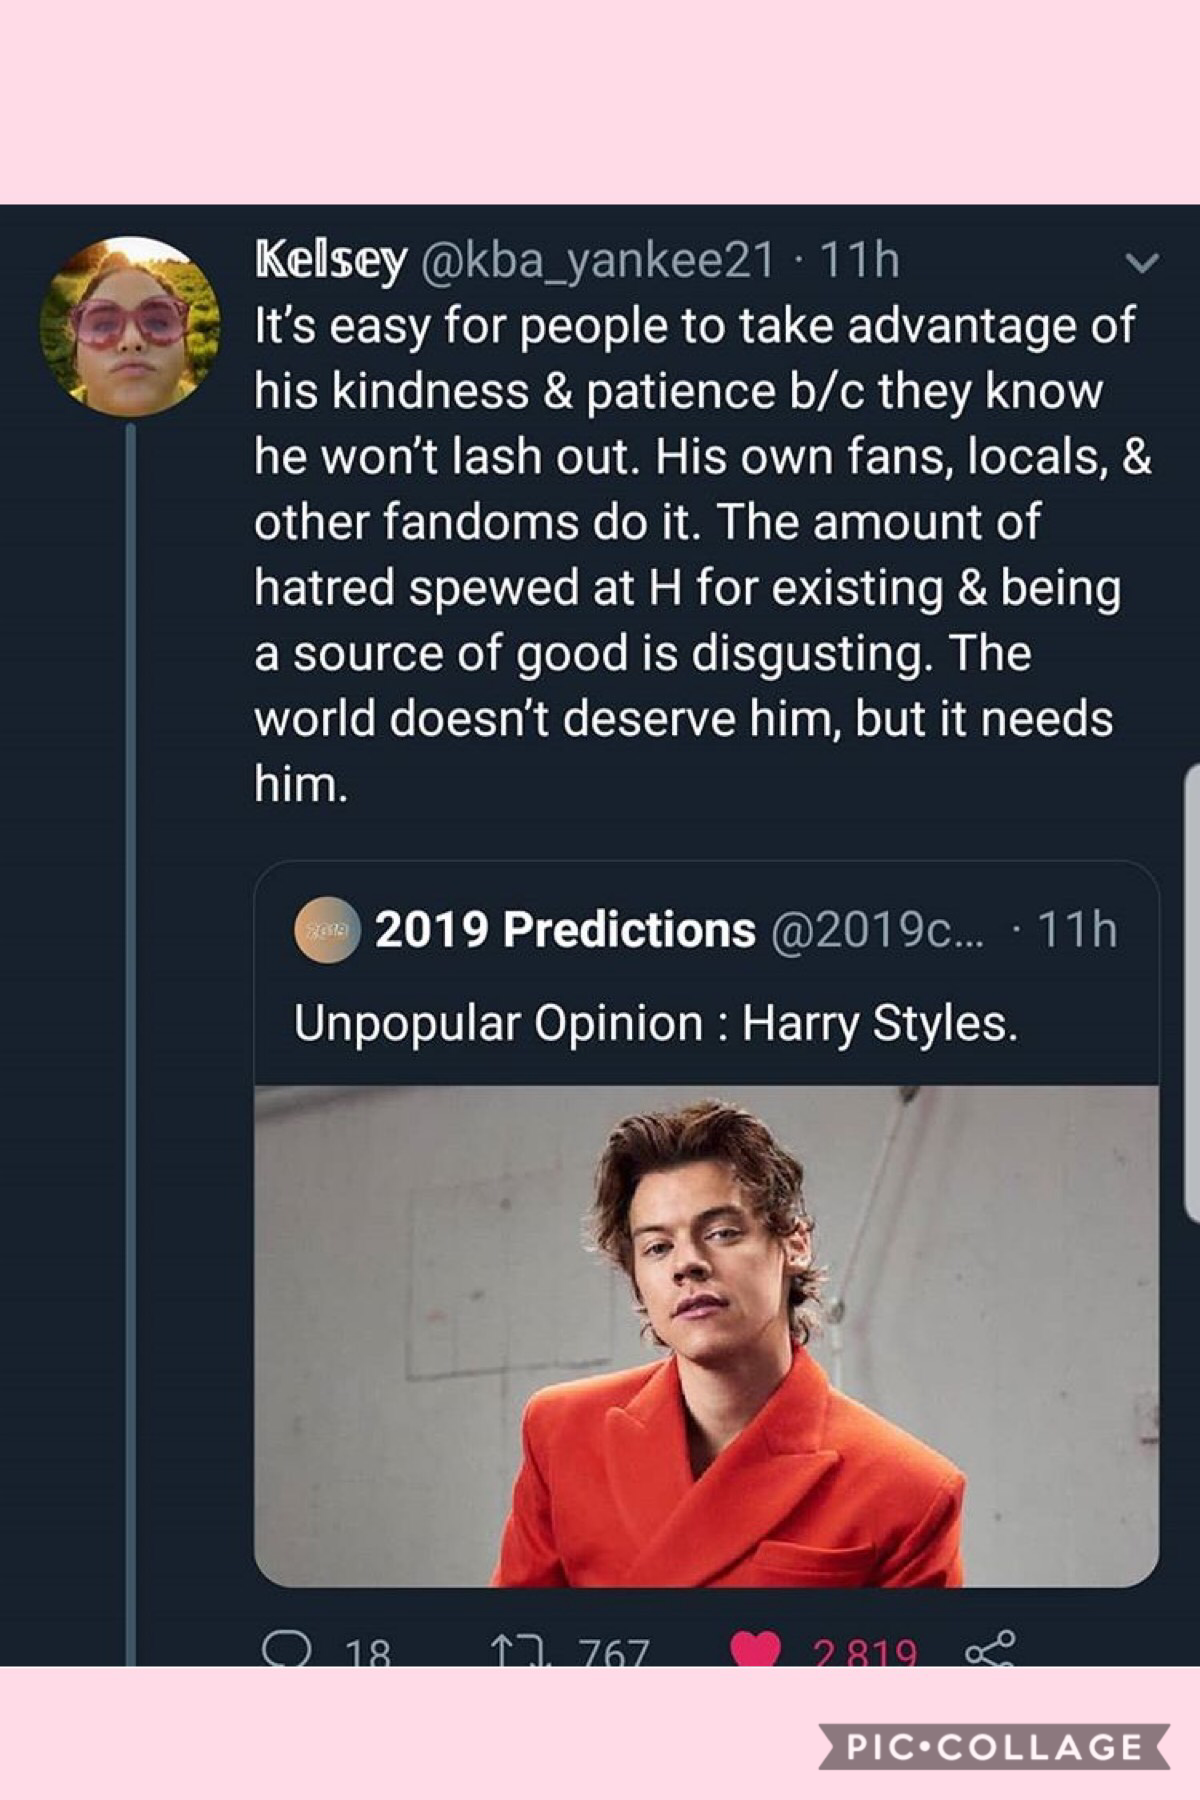 F A C T S S S S S S S S -click-

What’s one of your unpopular opinions about harry? I feel like people look down on him because he was in a boy band when in reality, he’s super talented and takes on so much between singing, songwriting, modeling, campaign